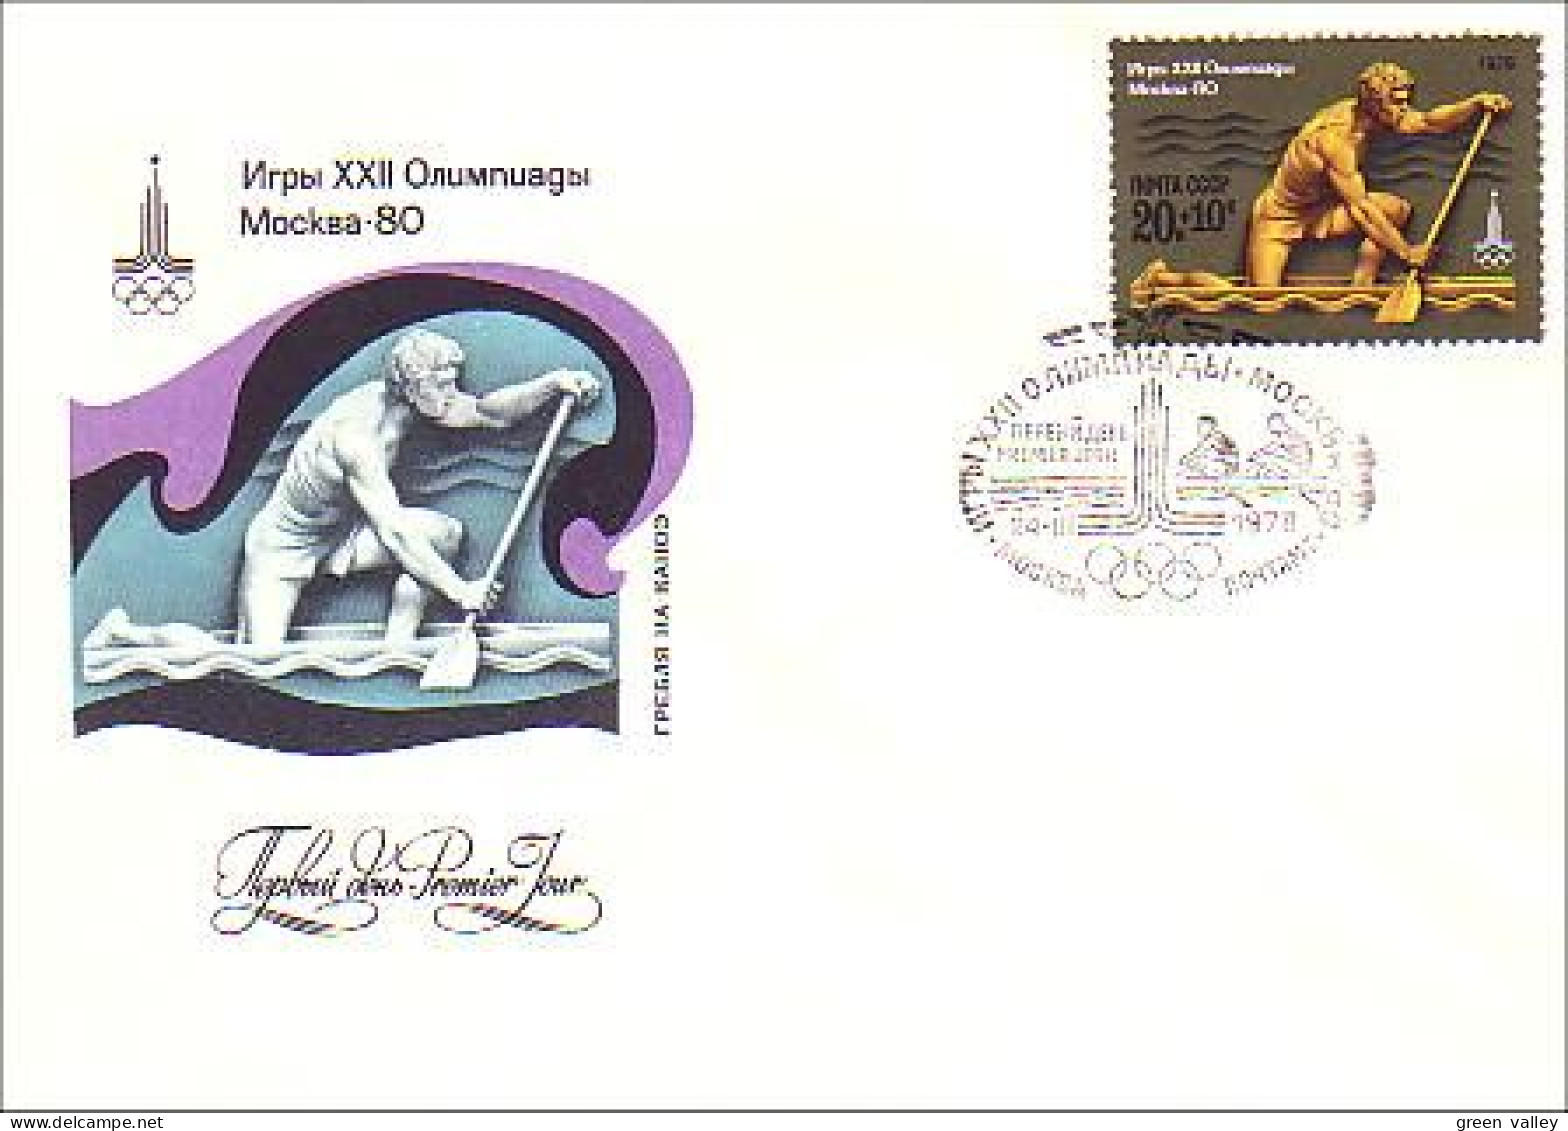 Russie Canoe Aviron Rowing 1980 FDC Cover ( A90 372b) - Canoë